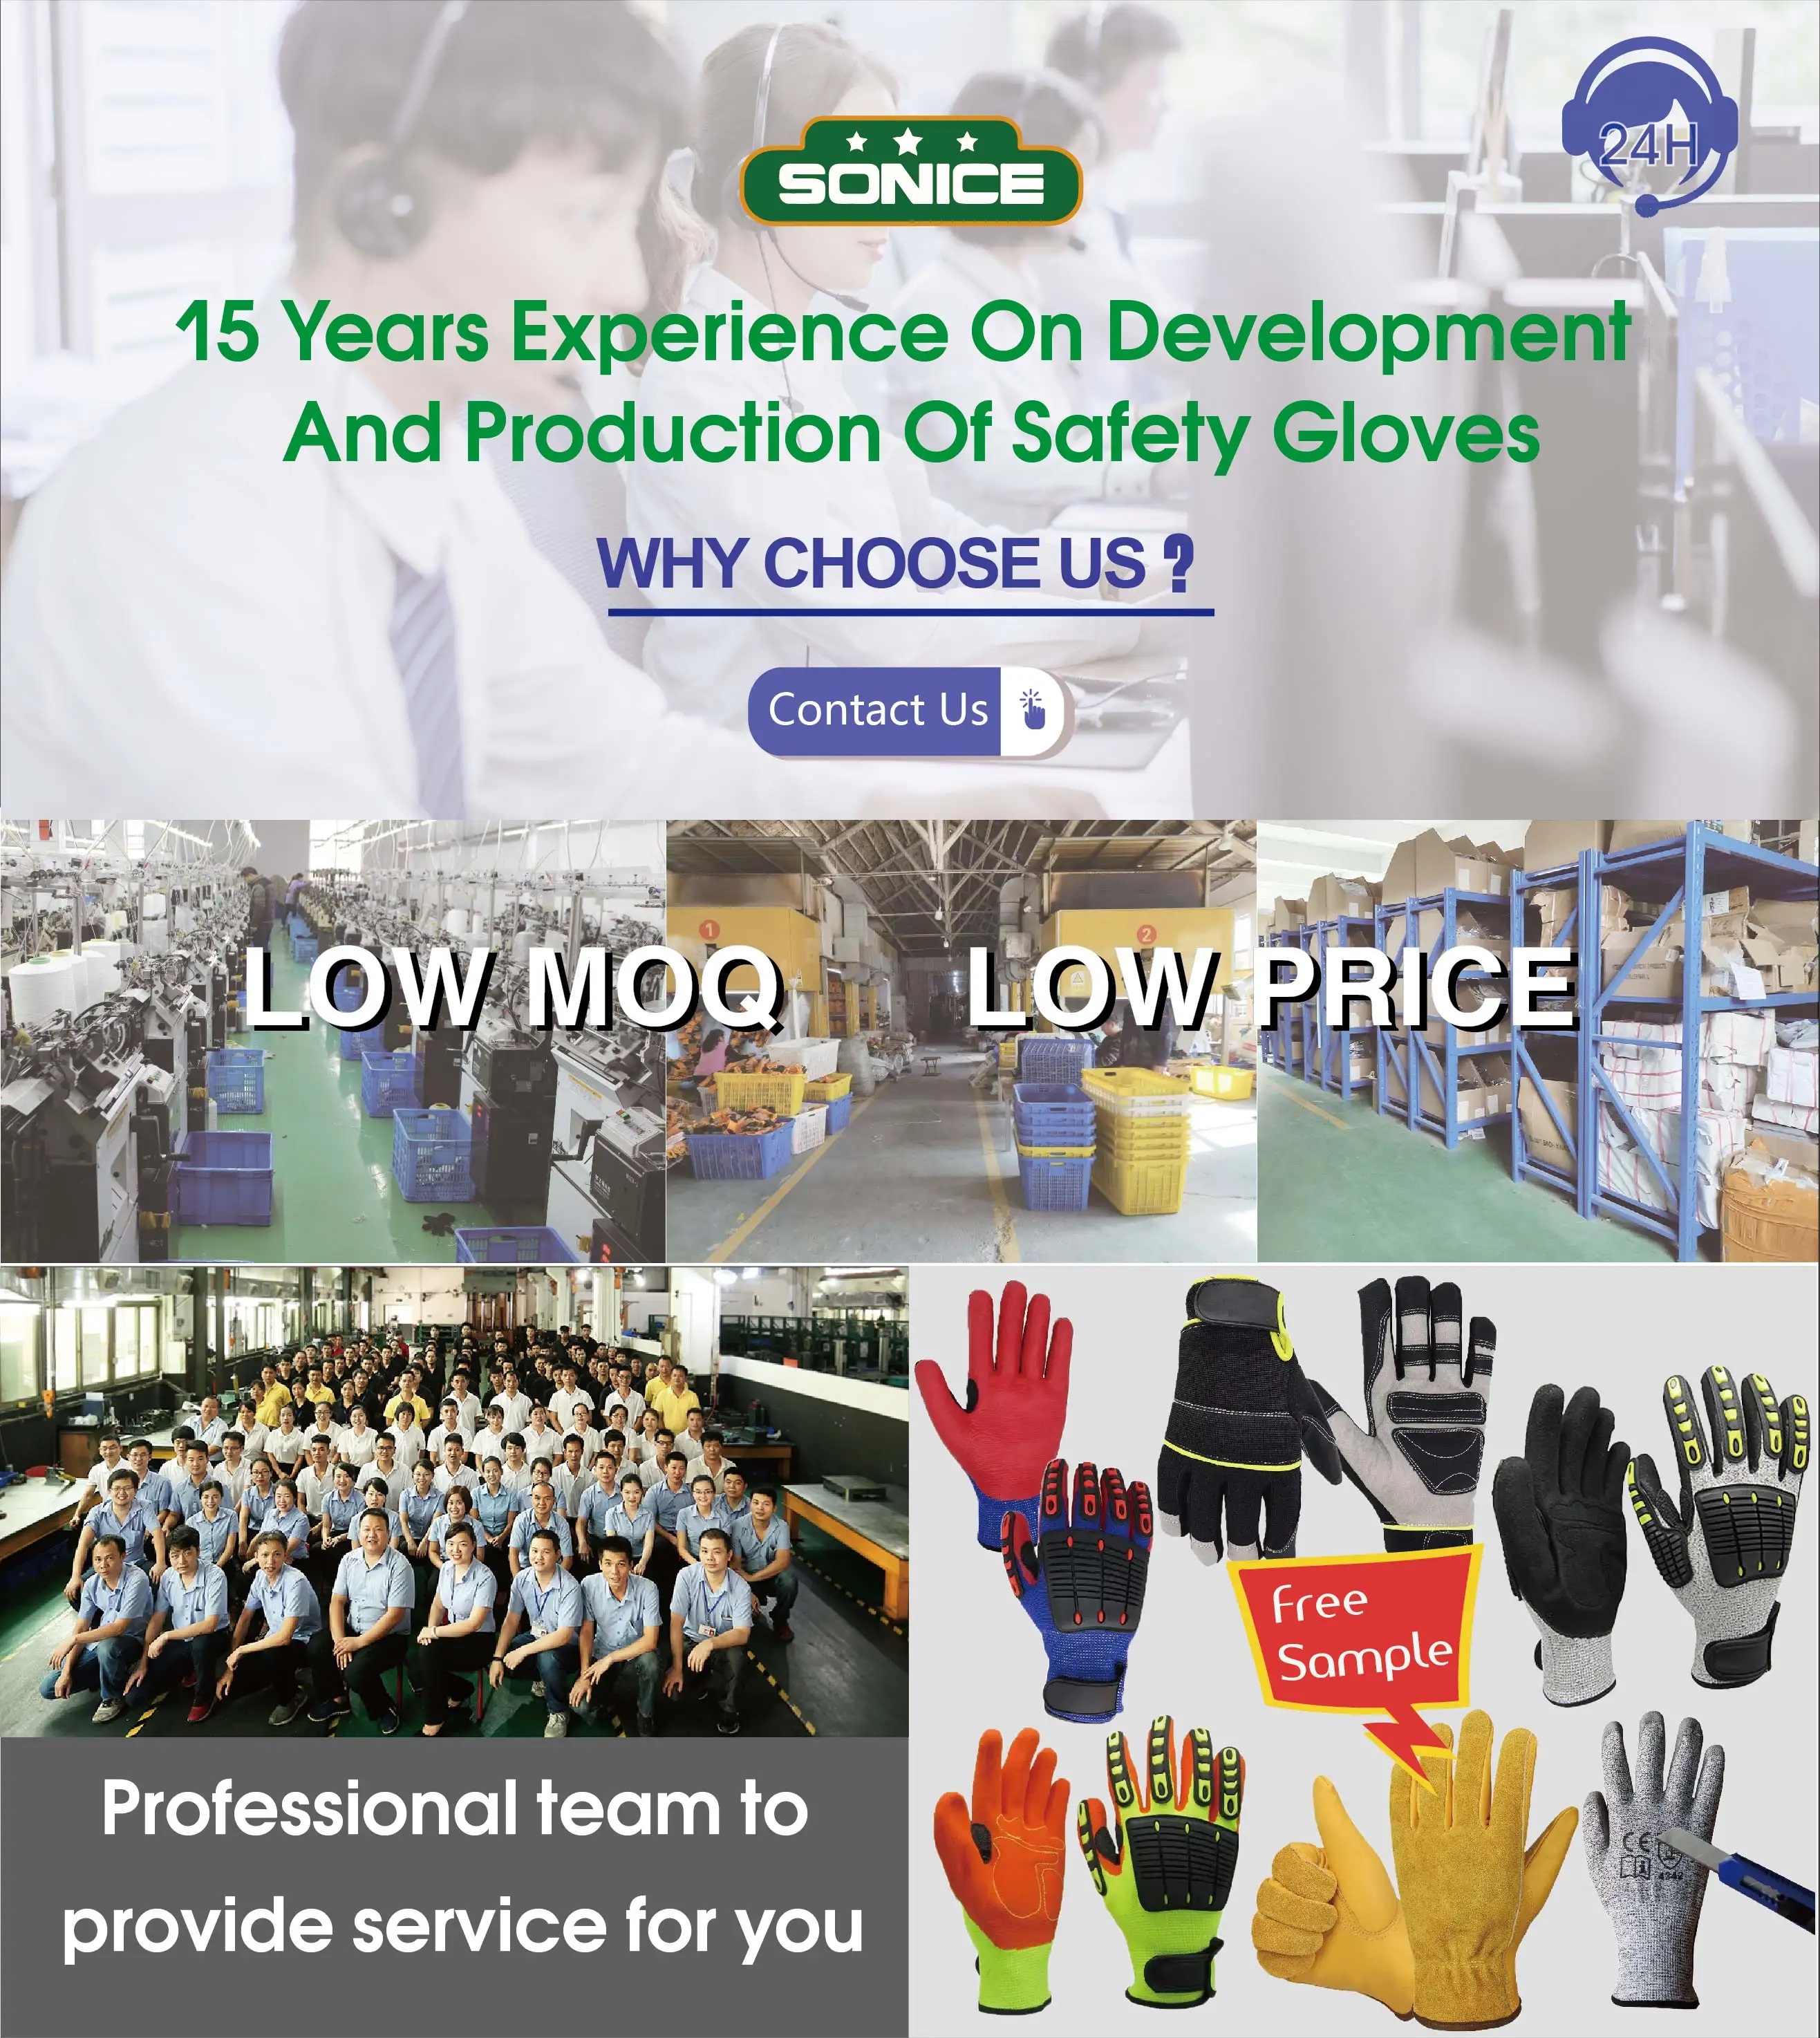 Labor Protection Gloves